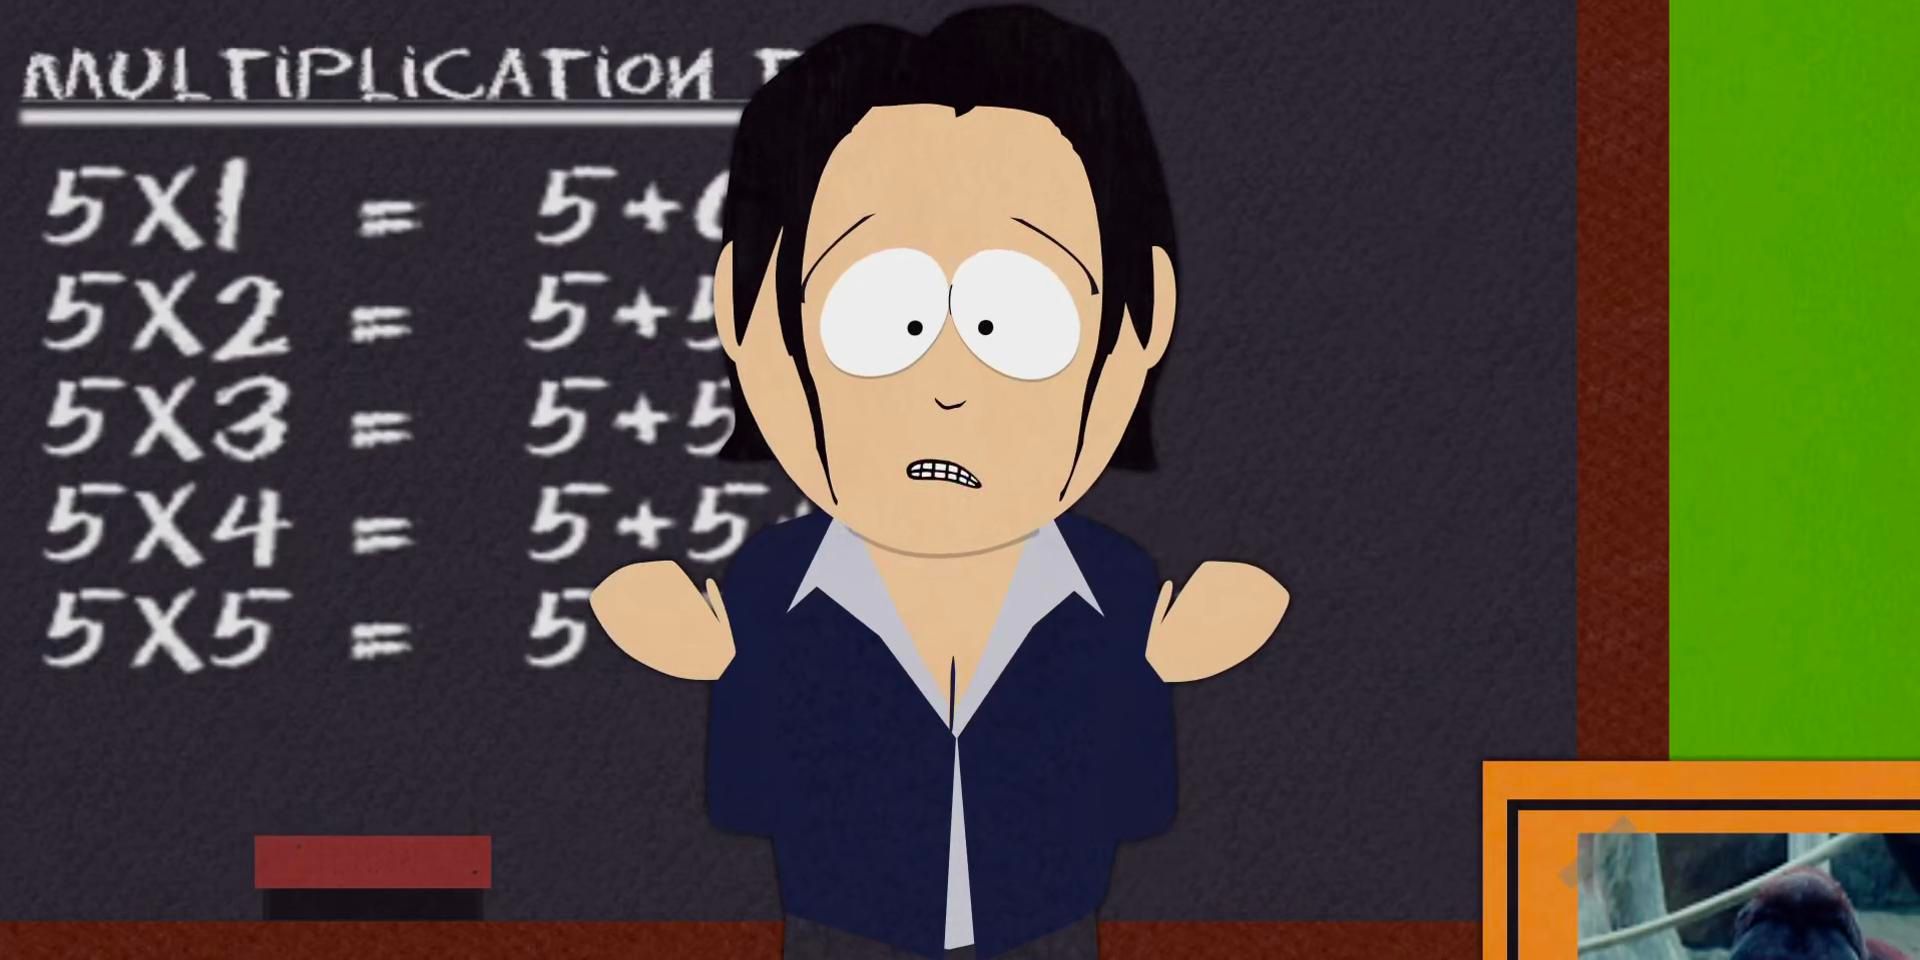 A South Park substitute teacher speaks to the class in front of a chalk board.